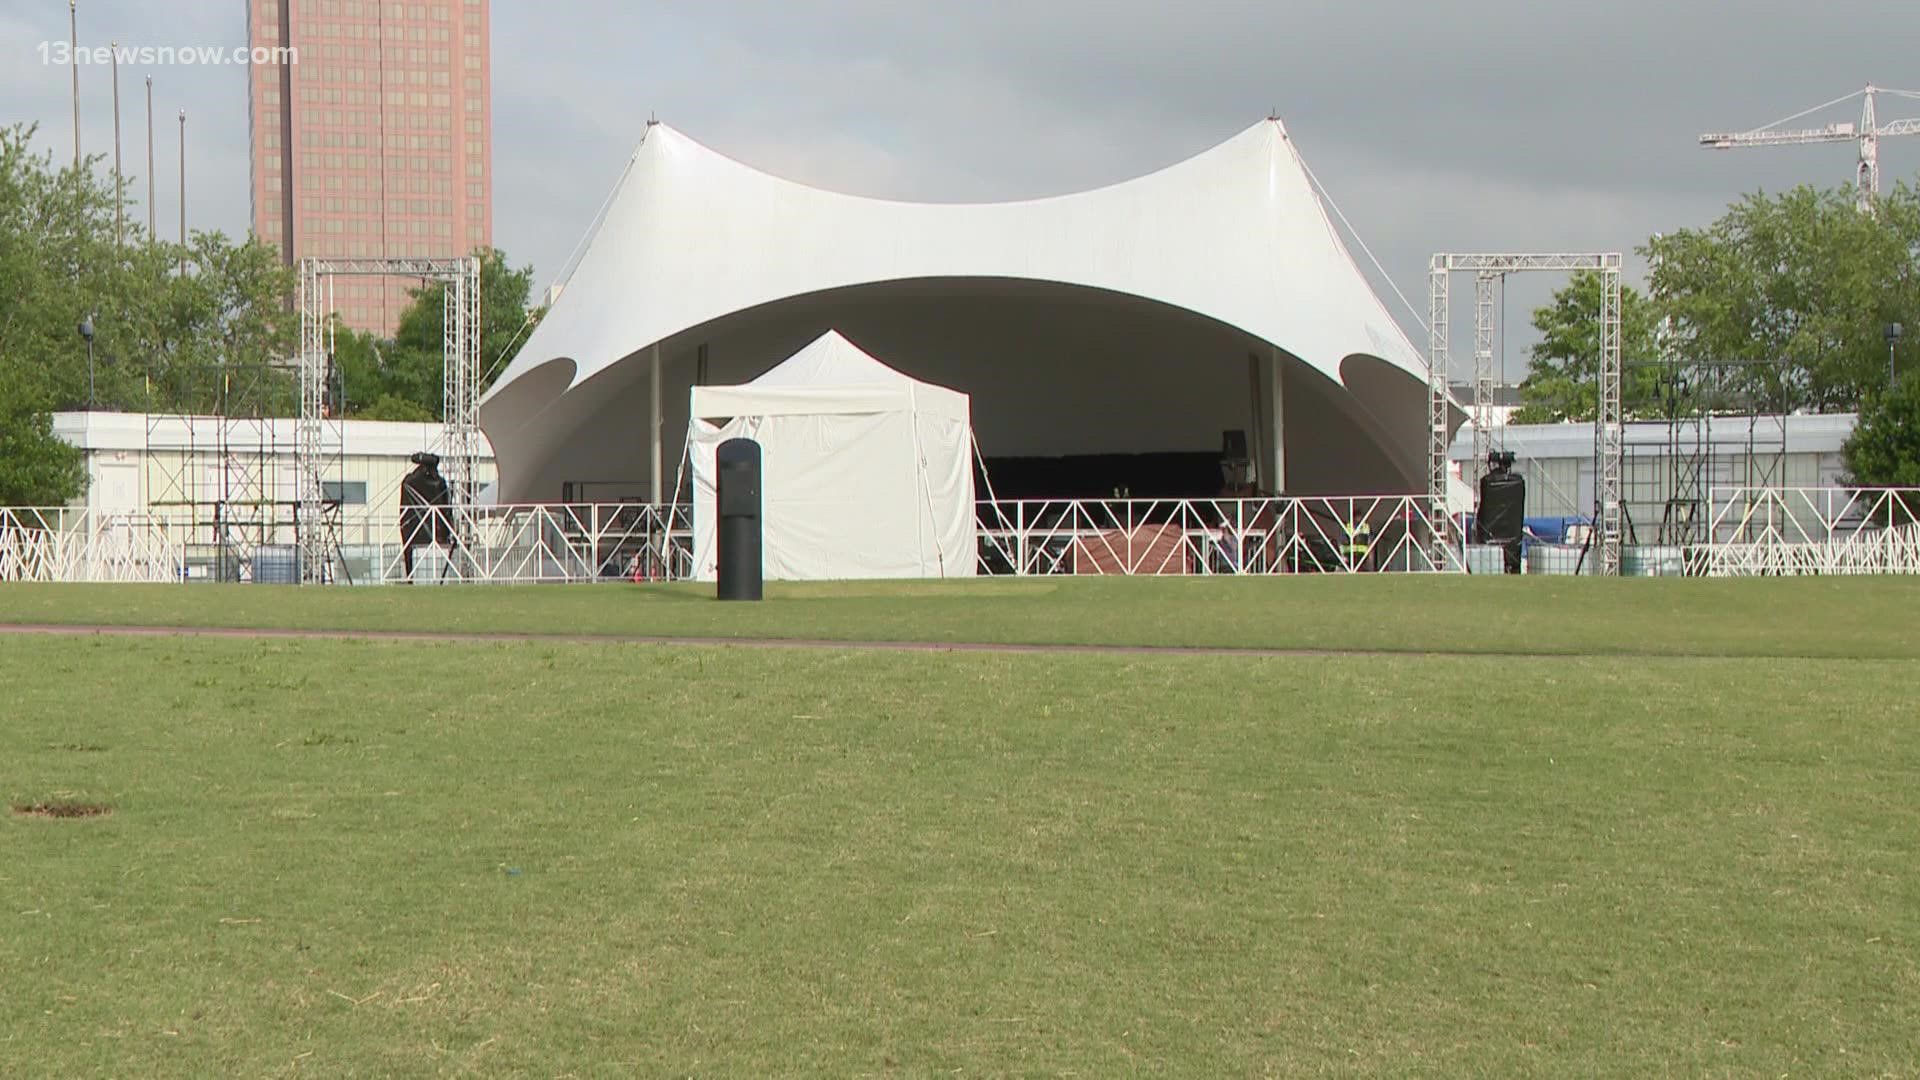 The opening ceremony was canceled, and tonight's performance featuring Jon Pardi’s has been moved to the Norfolk Scope Arena.